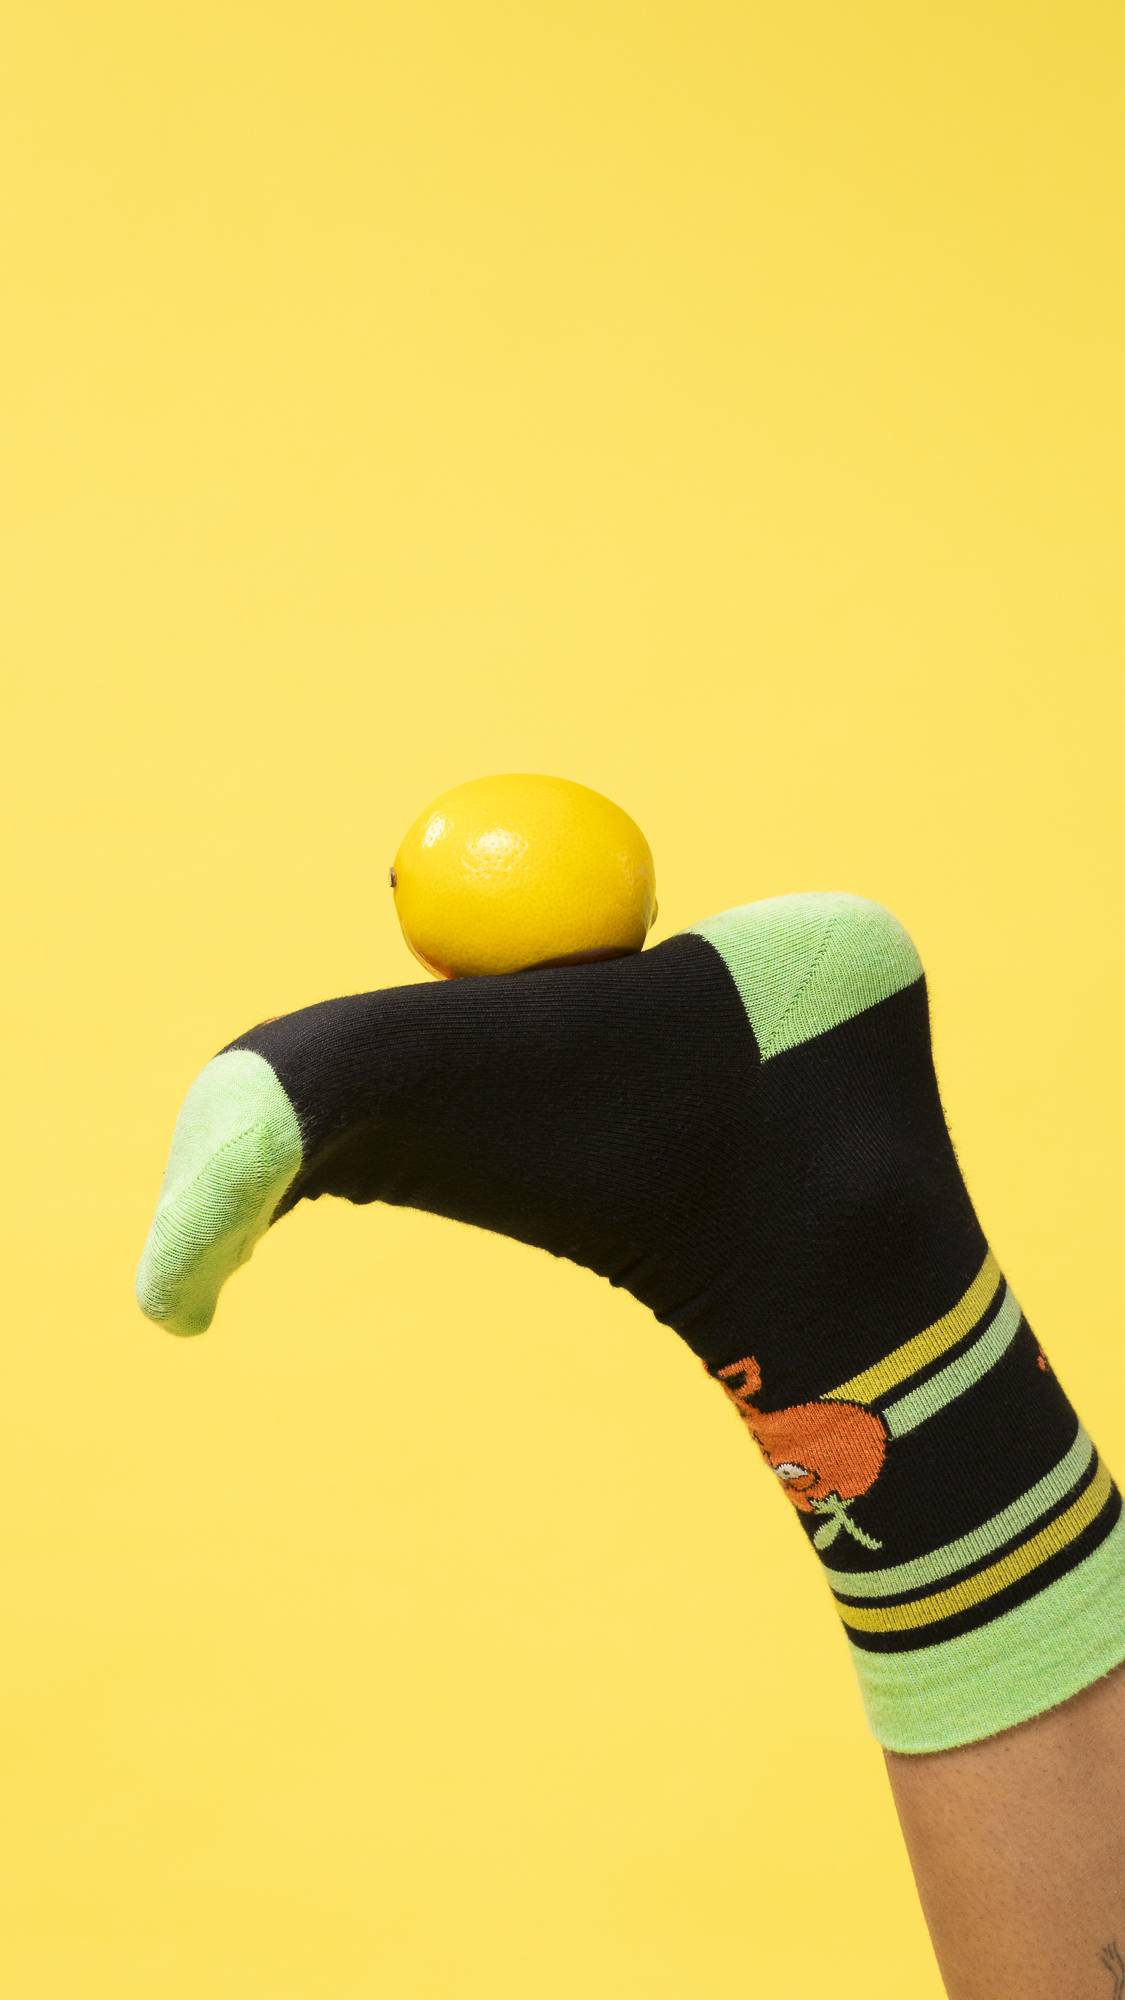 A single foot wearing the Fresh Values sock is stuck in the air balancing an orange on a bright yellow background.